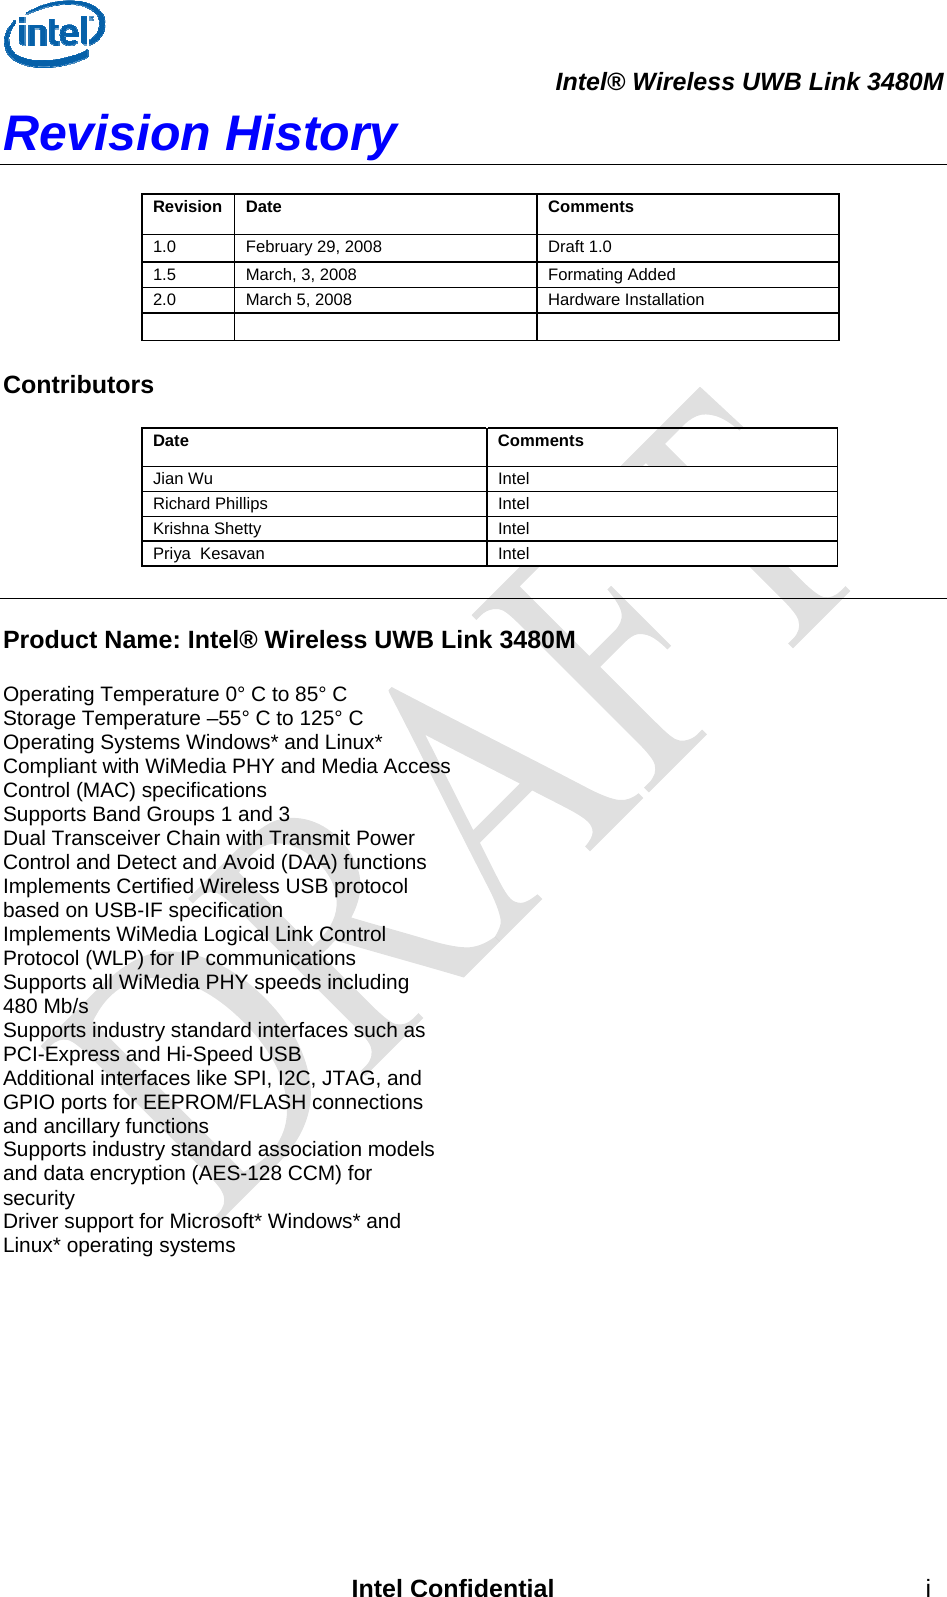  Intel® Wireless UWB Link 3480M Revision History  Revision Date  Comments 1.0  February 29, 2008  Draft 1.0  1.5  March, 3, 2008  Formating Added 2.0  March 5, 2008  Hardware Installation       Contributors  Date Comments Jian Wu  Intel  Richard Phillips  Intel Krishna Shetty  Intel Priya  Kesavan  Intel   Product Name: Intel® Wireless UWB Link 3480M  Operating Temperature 0° C to 85° C Storage Temperature –55° C to 125° C Operating Systems Windows* and Linux* Compliant with WiMedia PHY and Media Access Control (MAC) specifications Supports Band Groups 1 and 3 Dual Transceiver Chain with Transmit Power Control and Detect and Avoid (DAA) functions Implements Certified Wireless USB protocol based on USB-IF specification Implements WiMedia Logical Link Control Protocol (WLP) for IP communications Supports all WiMedia PHY speeds including 480 Mb/s Supports industry standard interfaces such as PCI-Express and Hi-Speed USB Additional interfaces like SPI, I2C, JTAG, and GPIO ports for EEPROM/FLASH connections and ancillary functions Supports industry standard association models and data encryption (AES-128 CCM) for security Driver support for Microsoft* Windows* and Linux* operating systems  Intel Confidential  i 